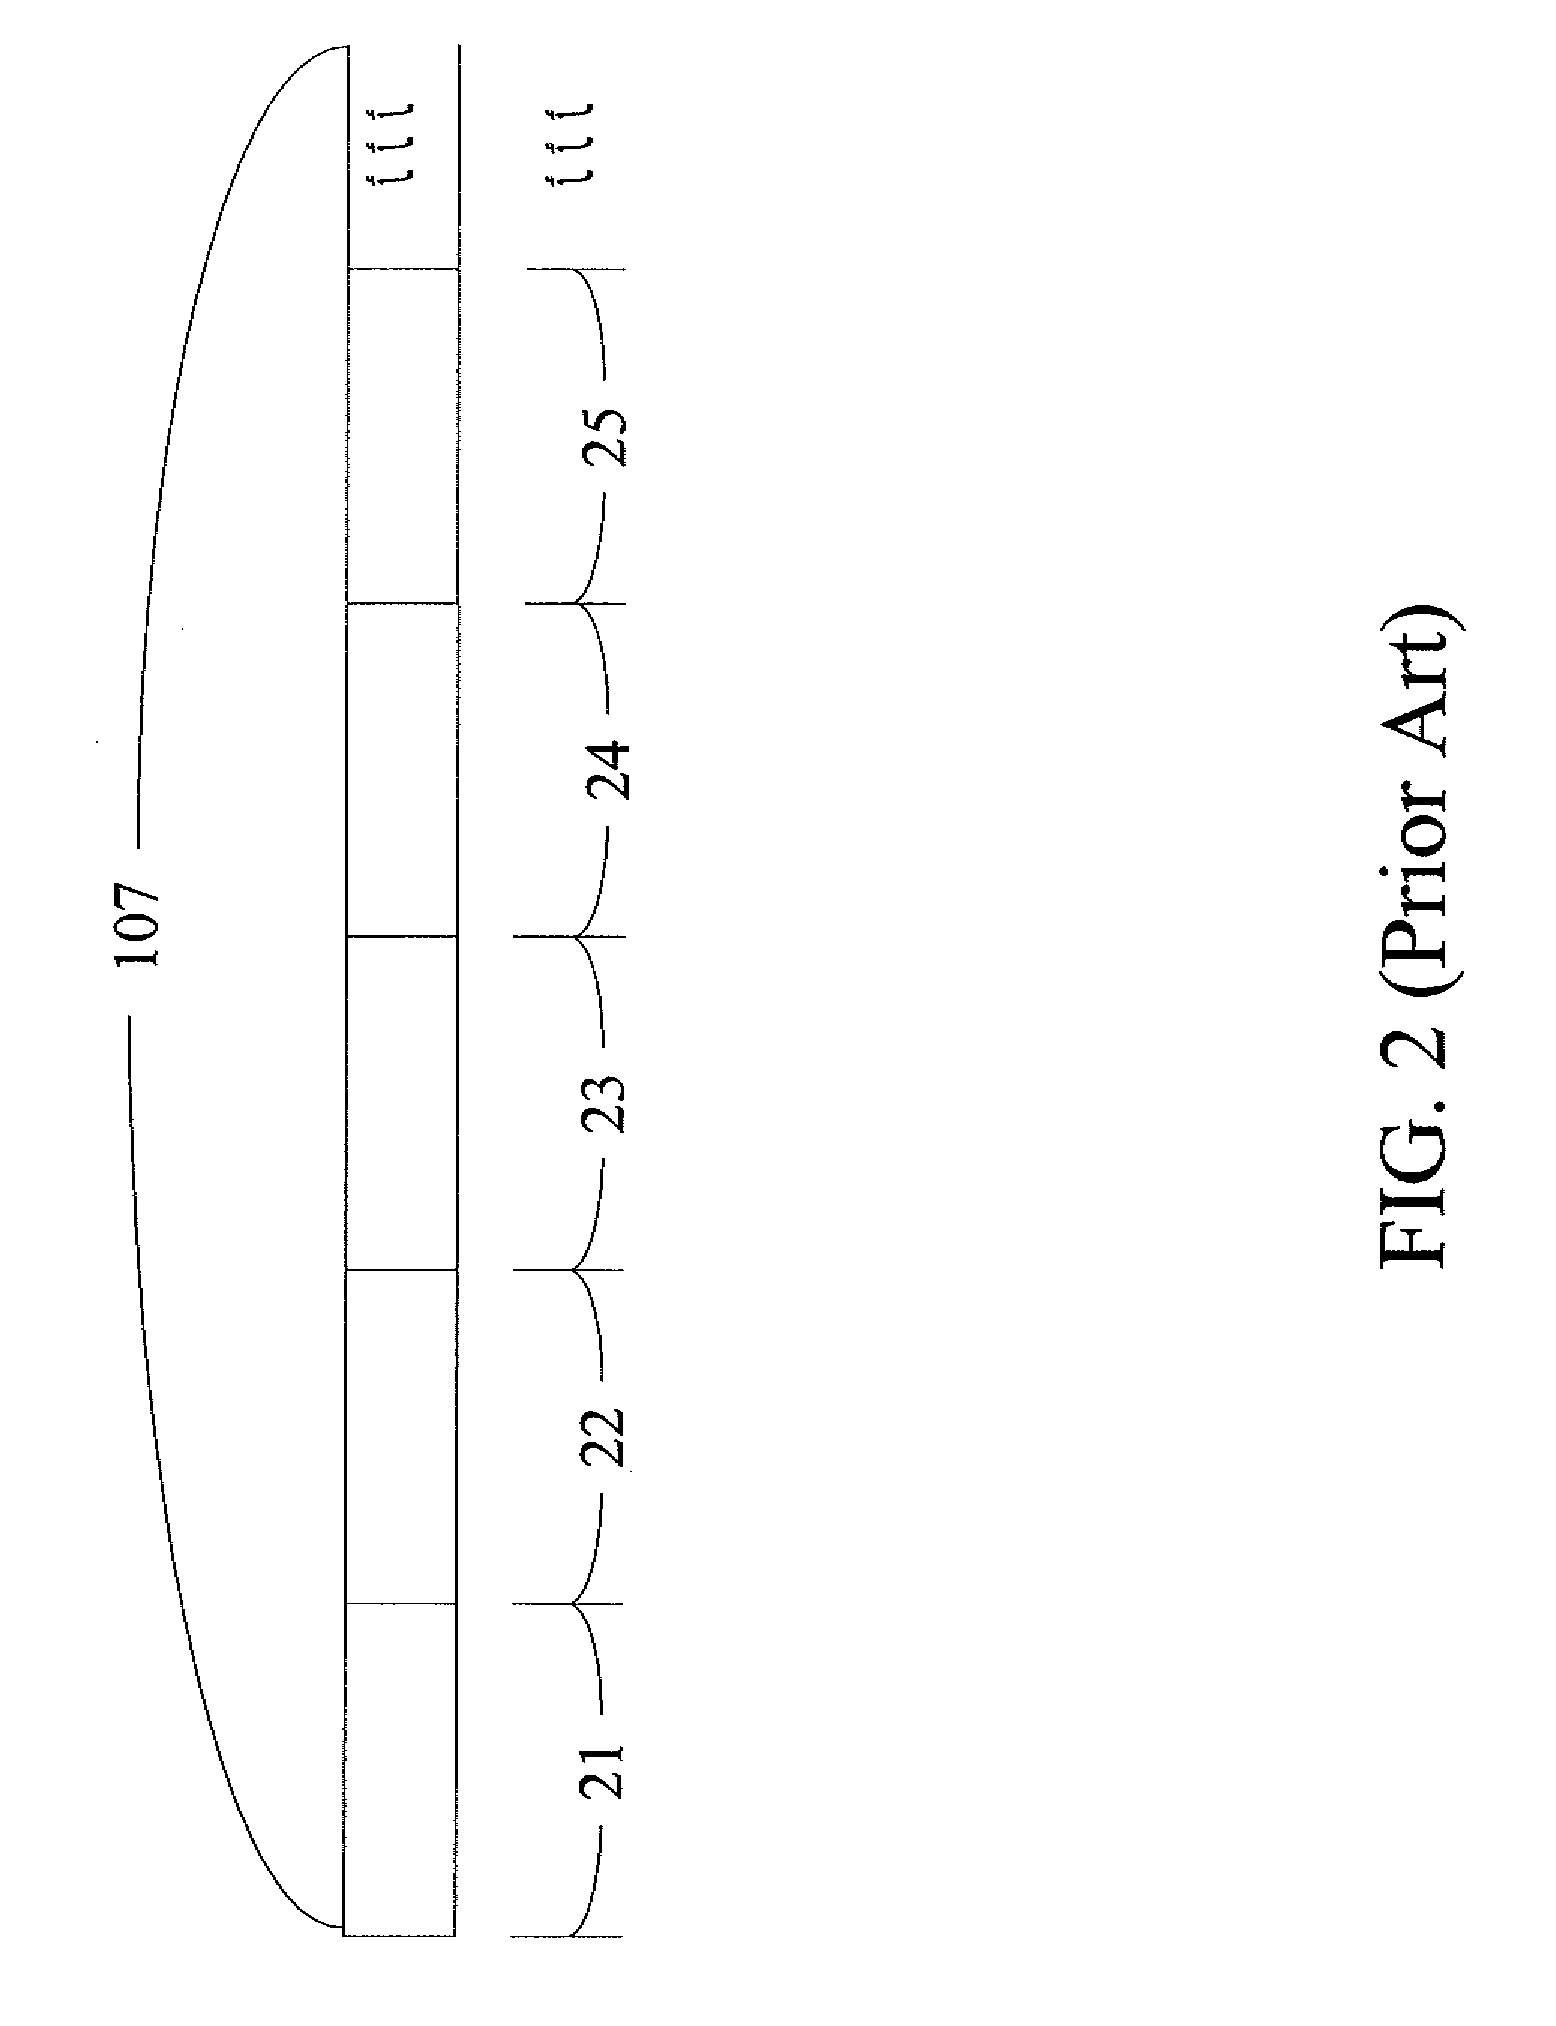 Voice detection apparatus, method, and computer readable medium for adjusting a window size dynamically